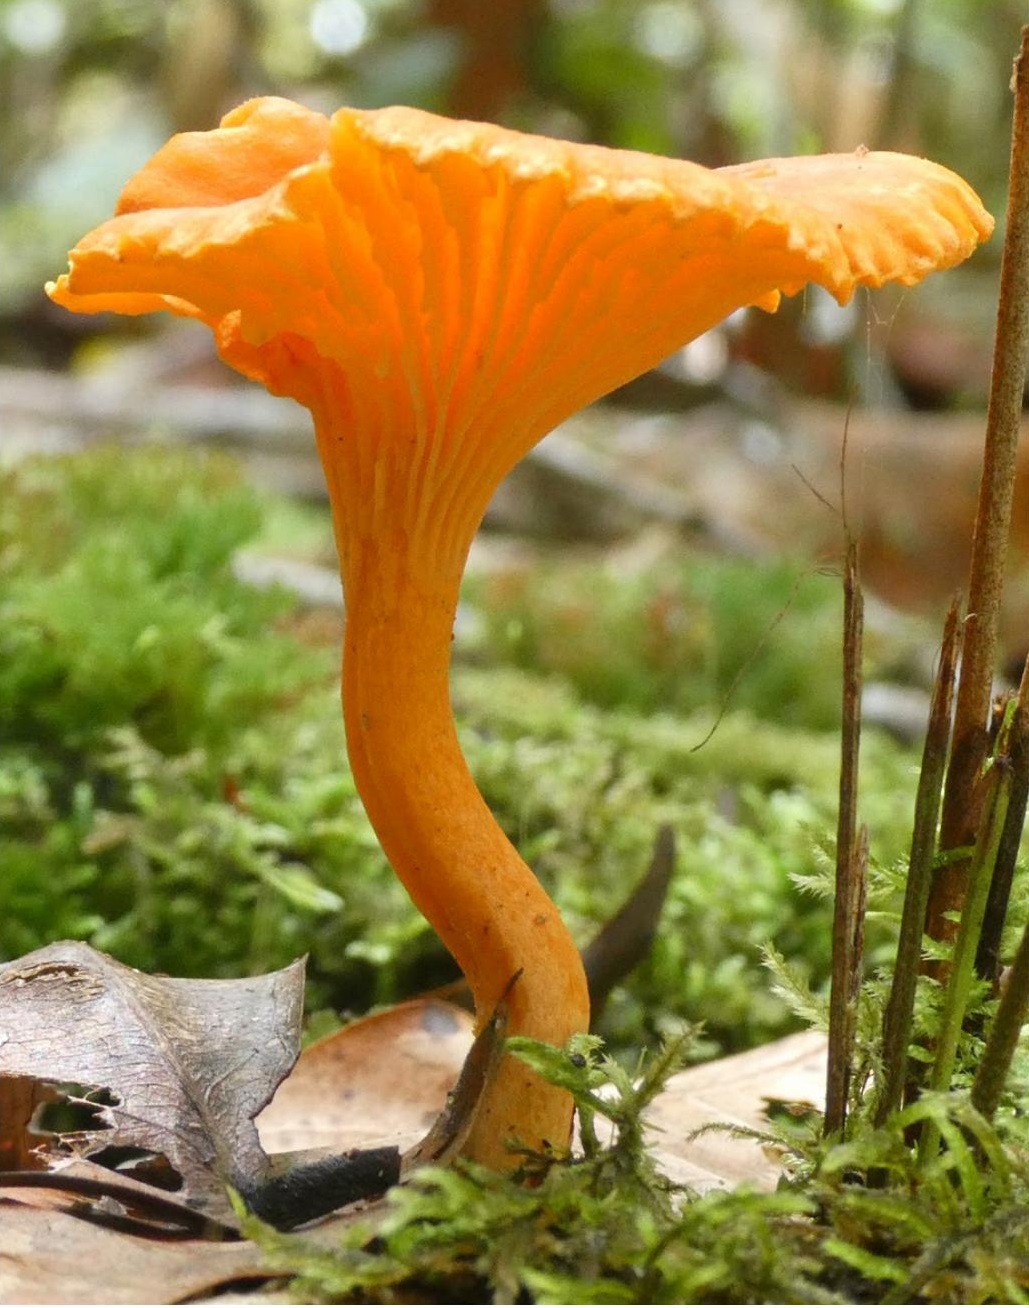 Figure 14. The fungus Cantharellus sp. lives in partnership with the trees, the tree gives energy and the fungus nutrients.